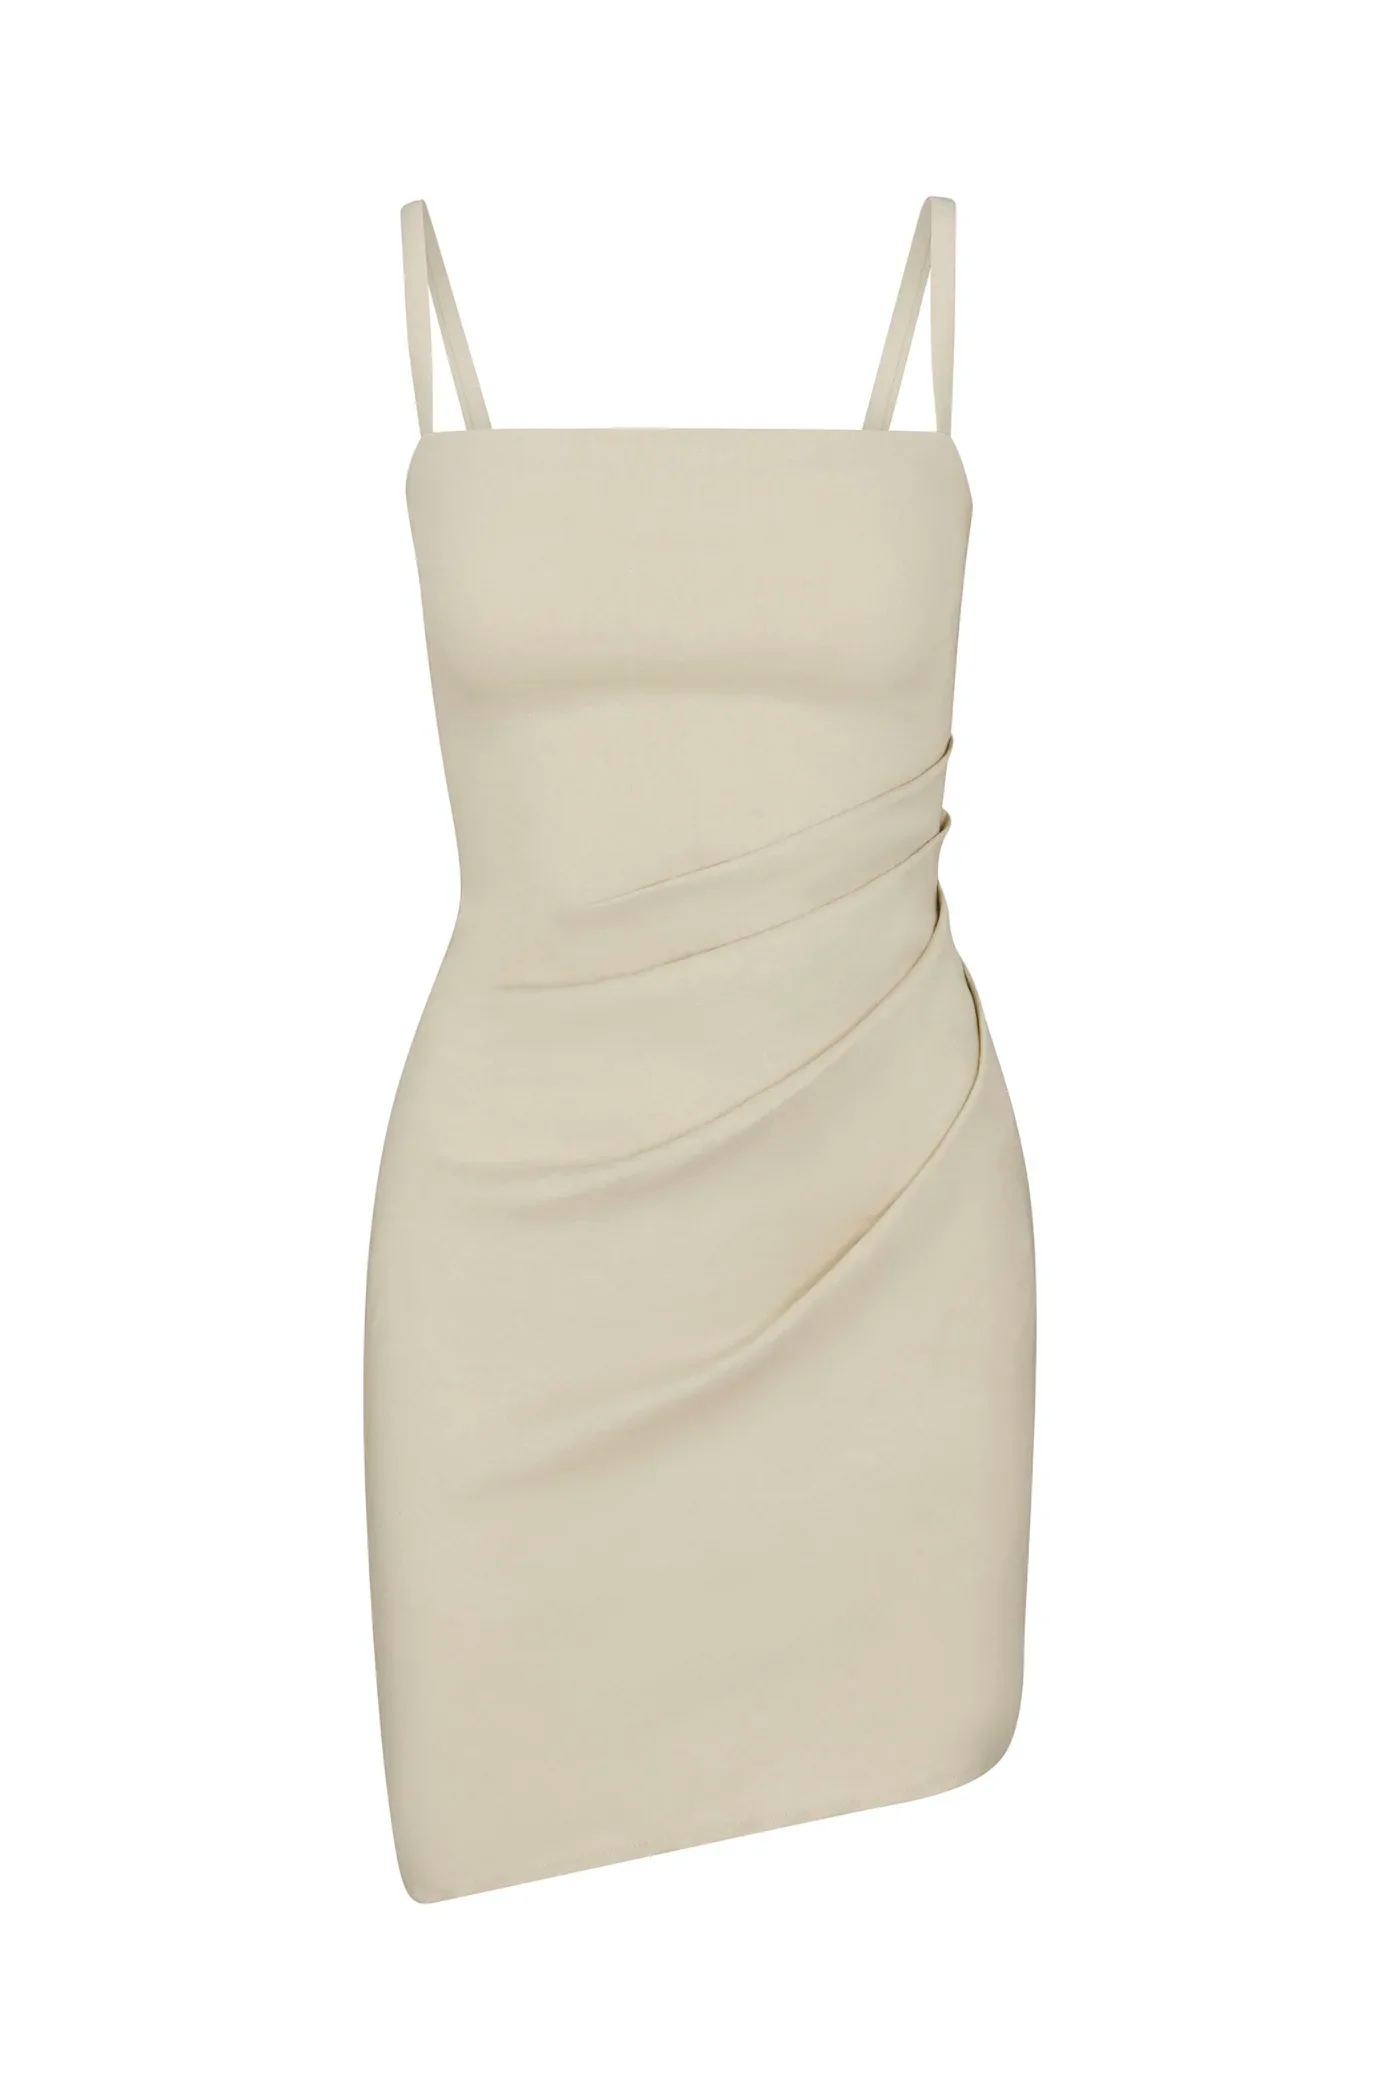 Product Image for The Nadege Draped Dress In Stretch Linen, Natural